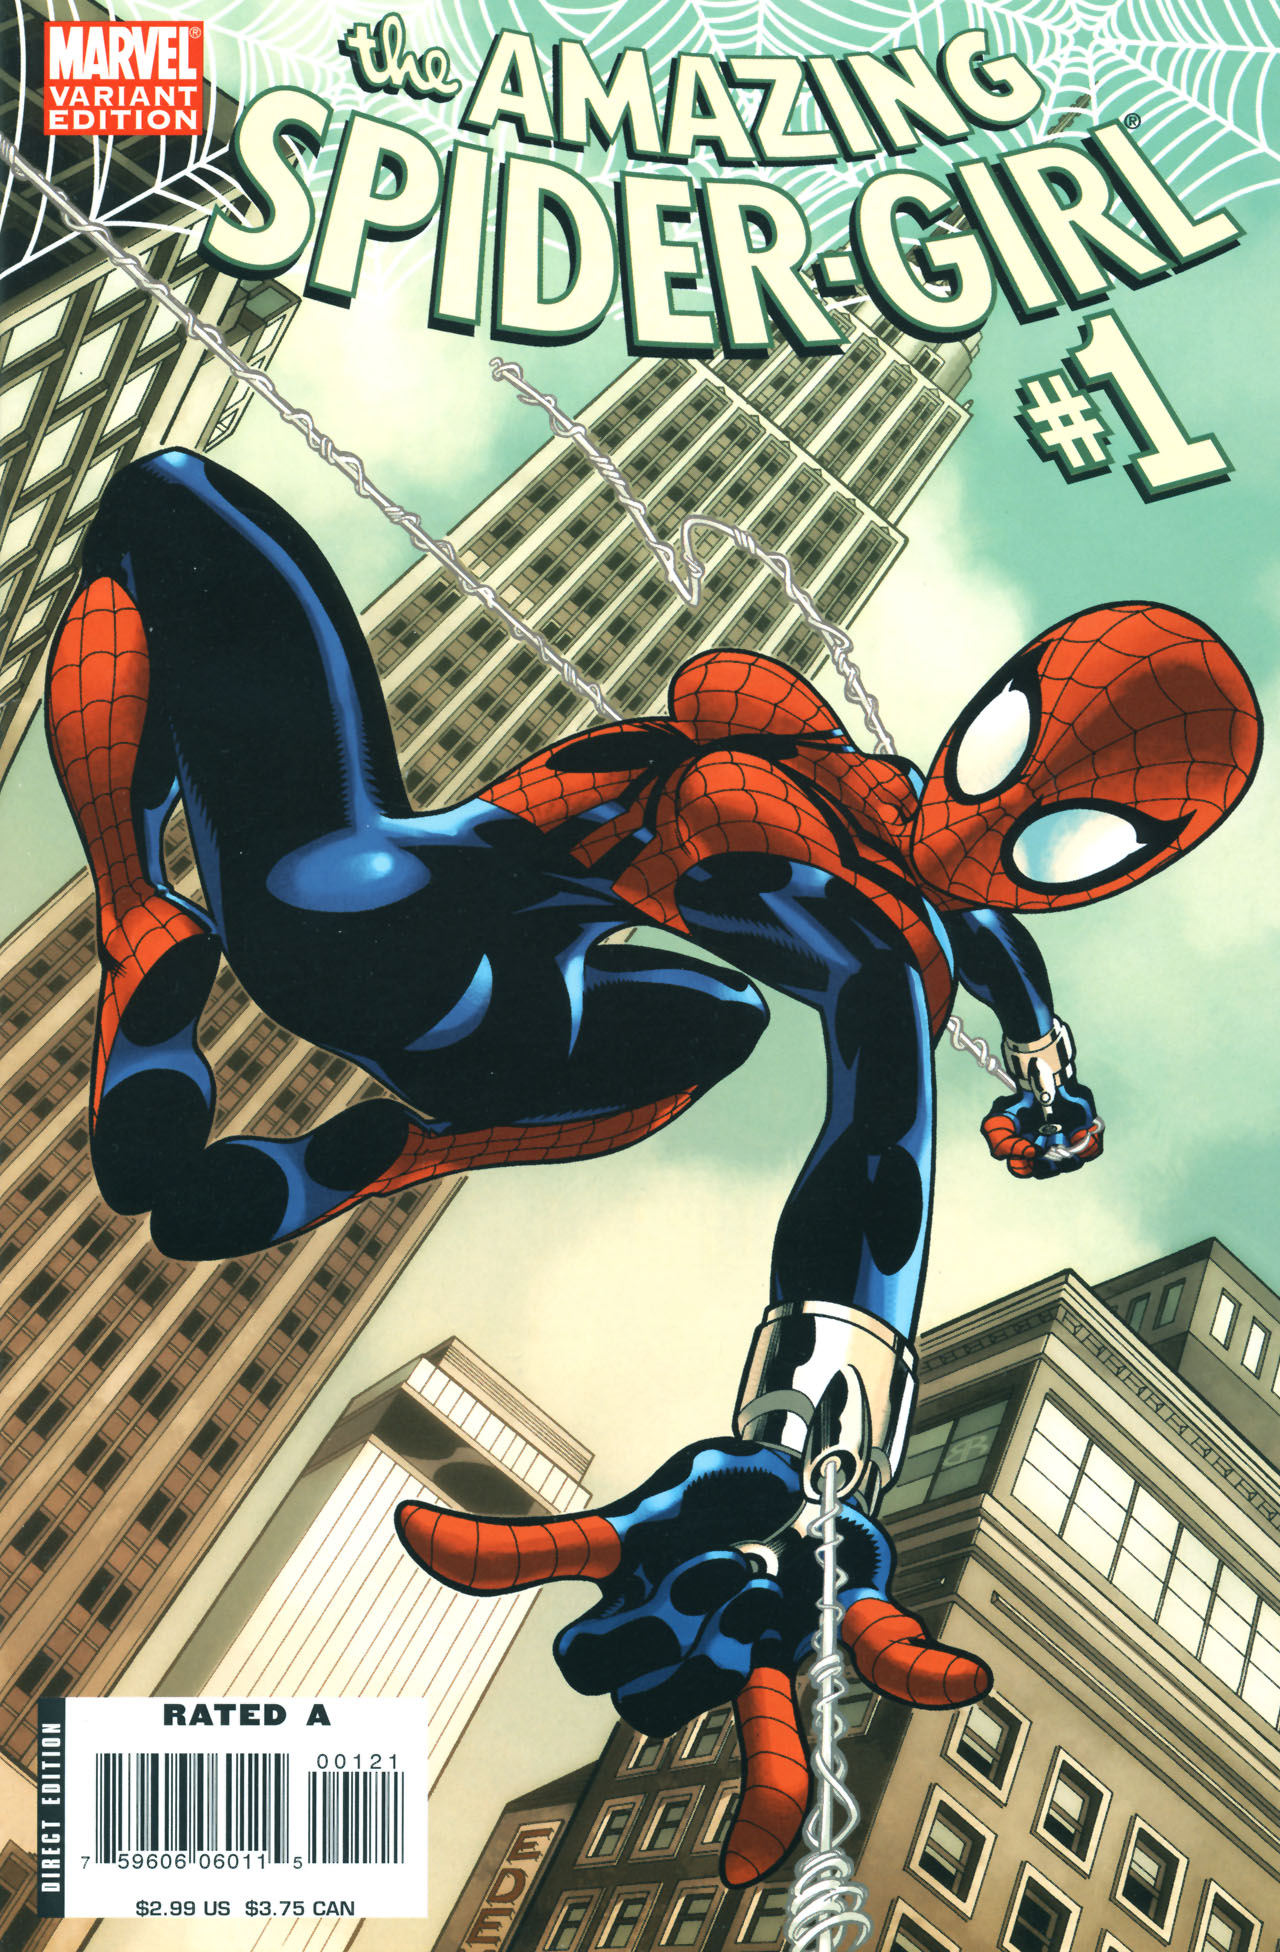 Read online Amazing Spider-Girl comic -  Issue #1 - 2